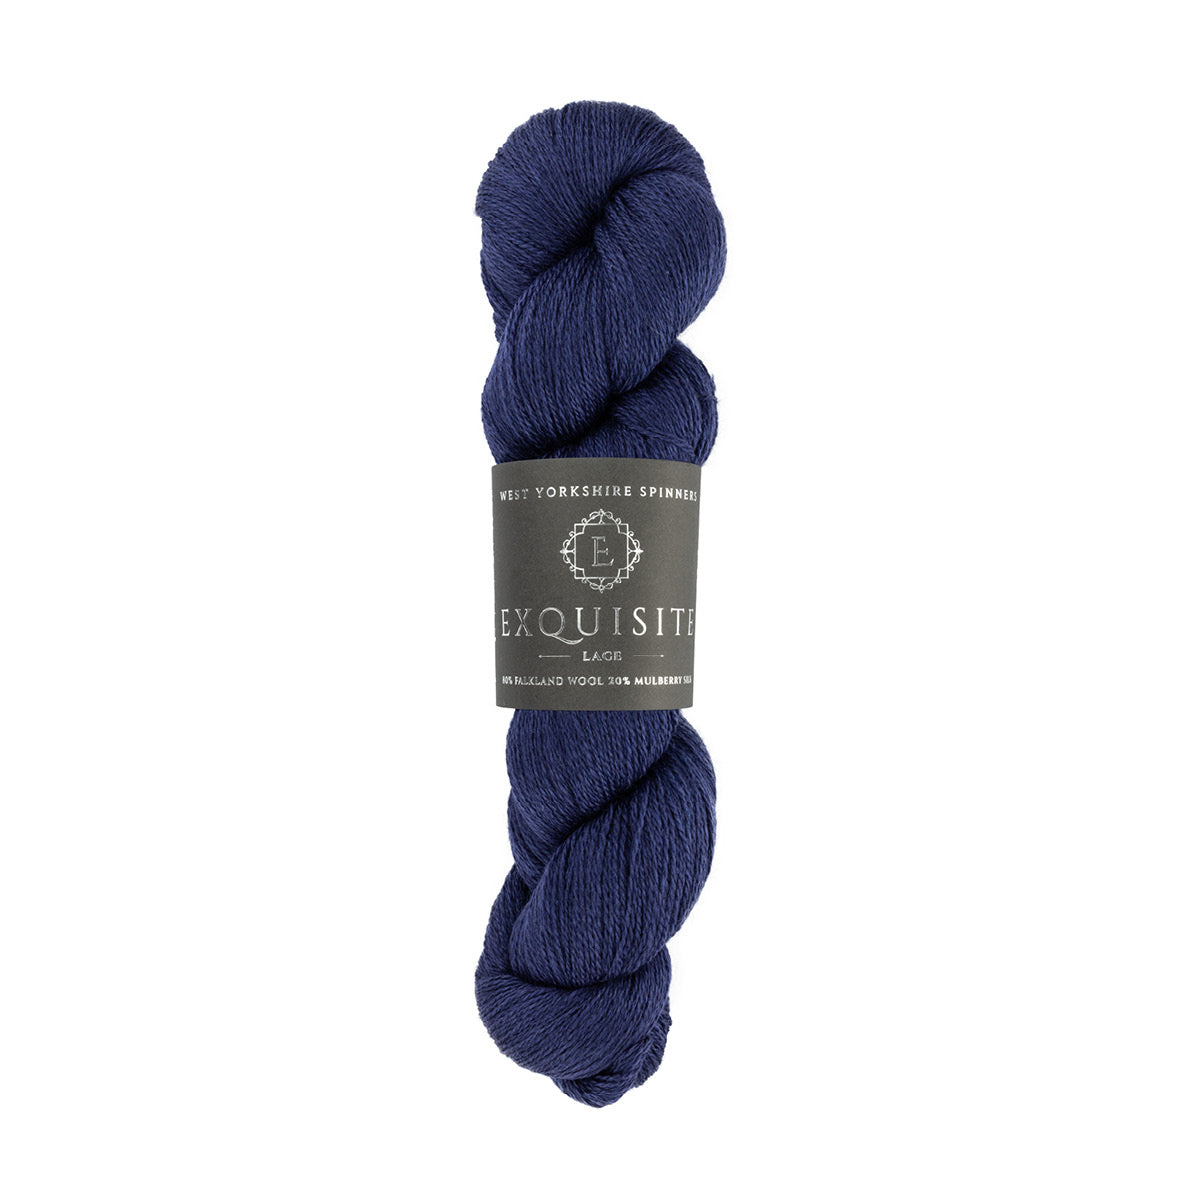 WYS West Yorkshire Spinners Exquisite Lace hank or skein in dark blue shade windsor 518